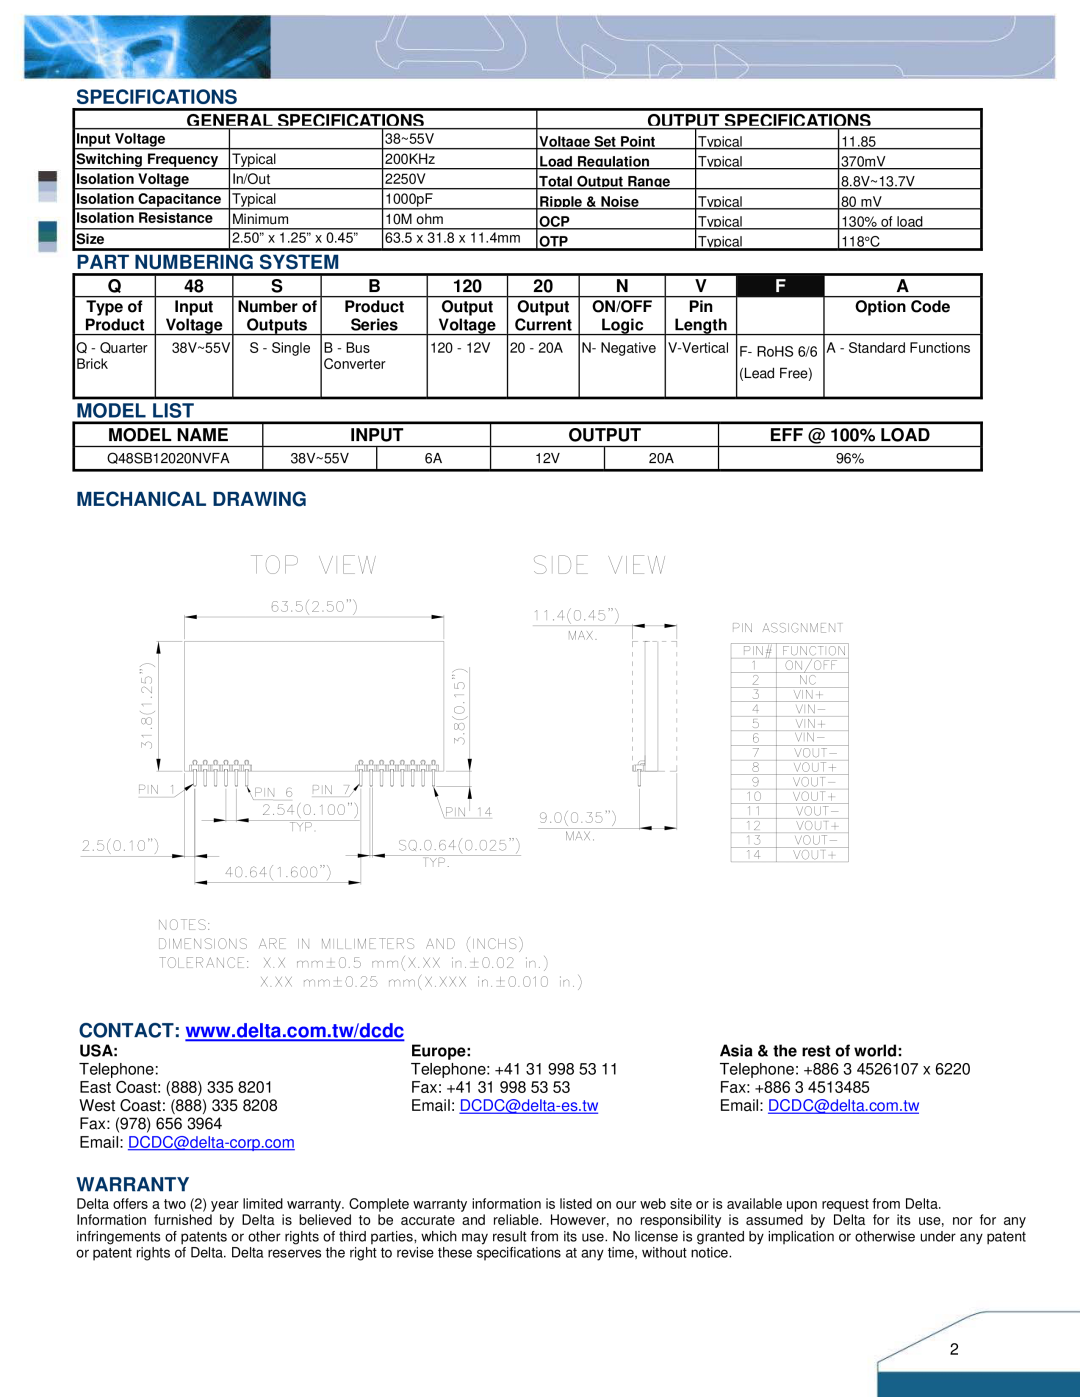 Delta Electronics Q48SB Specifications, Part Numbering System, Model List, Mechanical Drawing, Warranty, Model Name, Input 